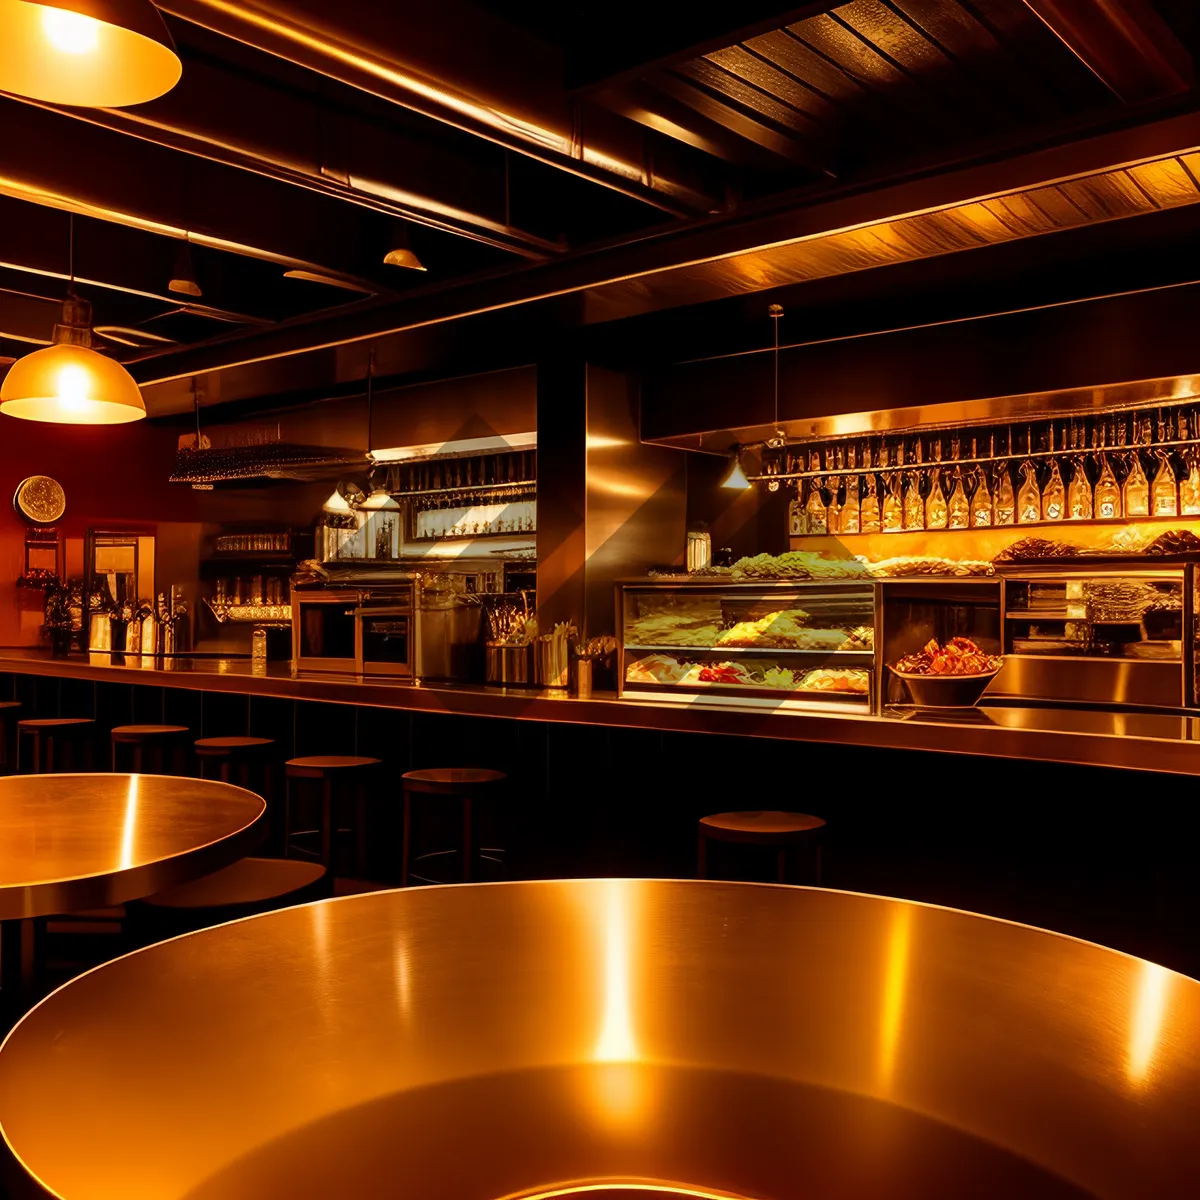 Picture of Nighttime ambiance in modern restaurant interior